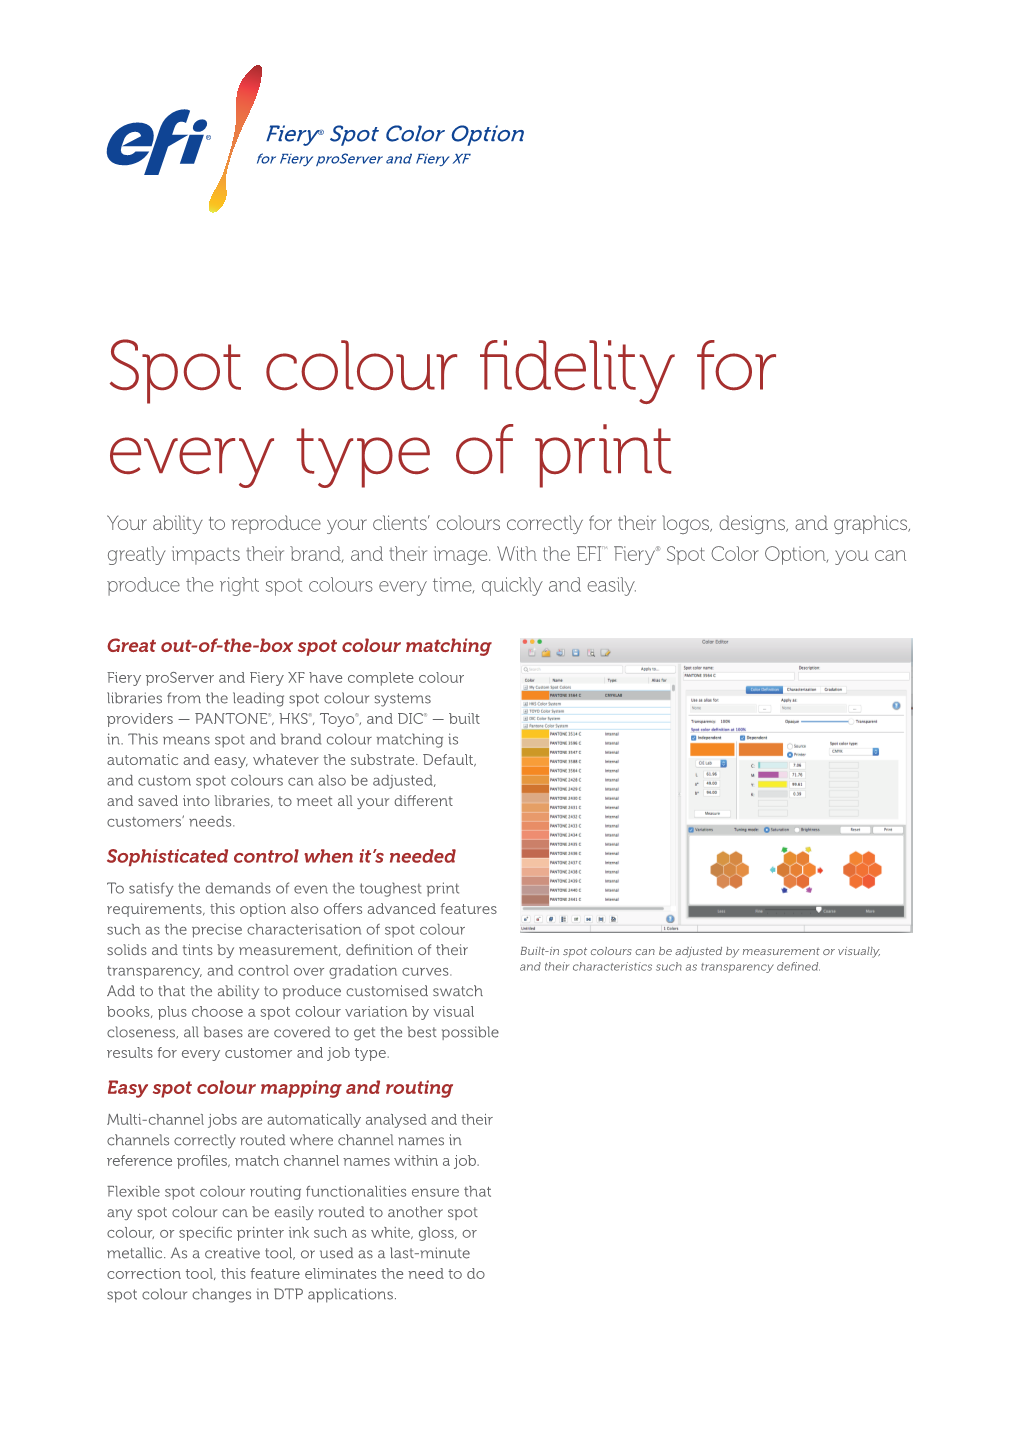 Spot Colour Fidelity for Every Type of Print